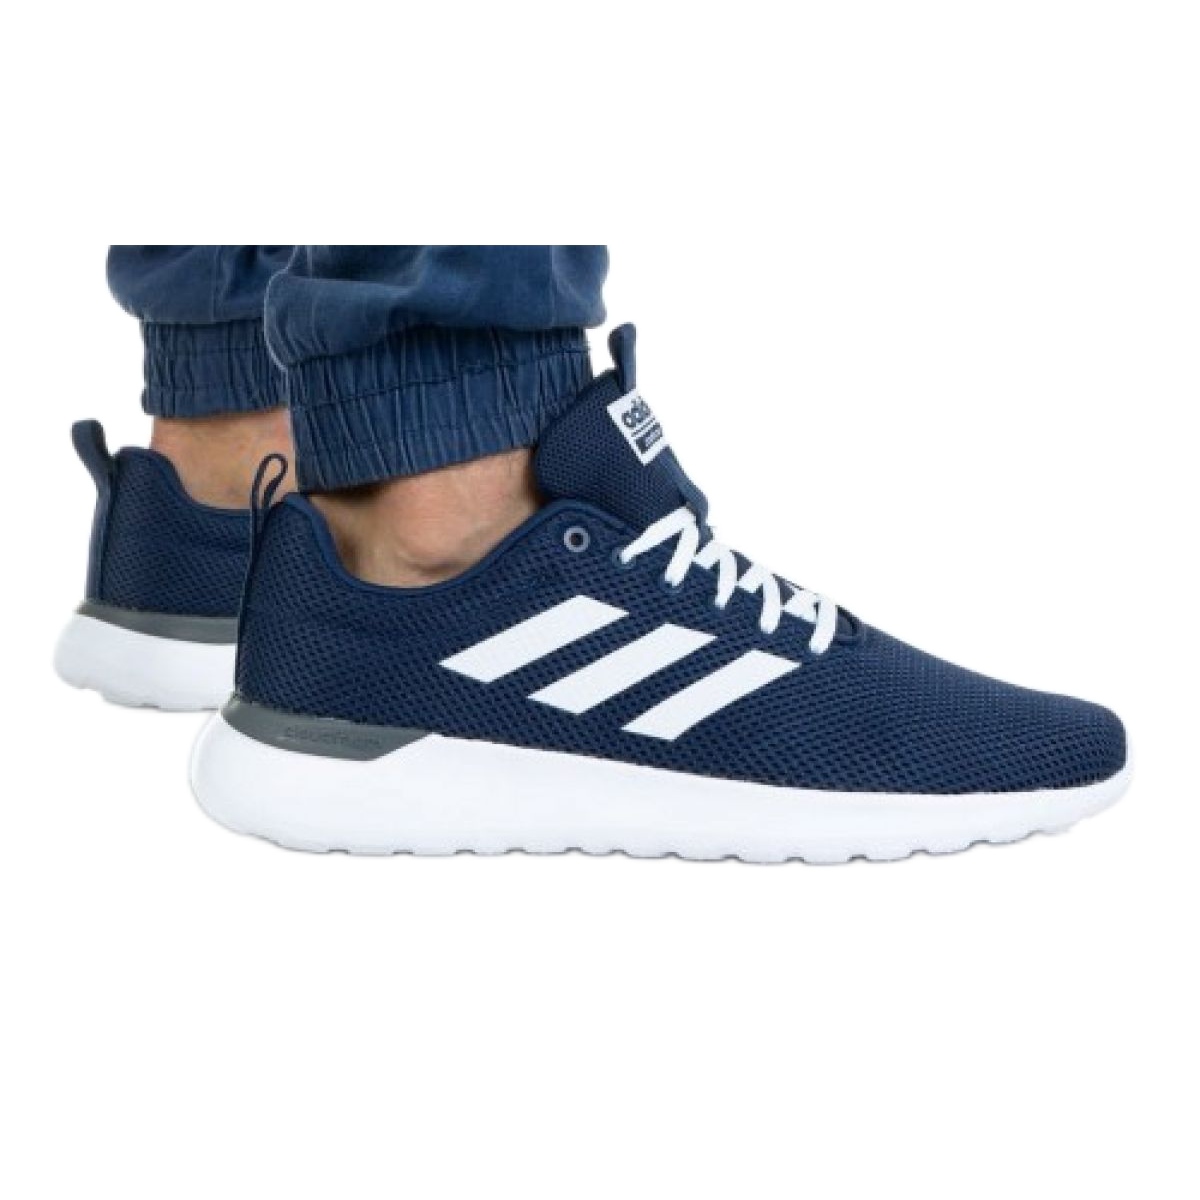 Adidas Lite Racer Cln M FW1334 shoes white navy blue - KeeShoes